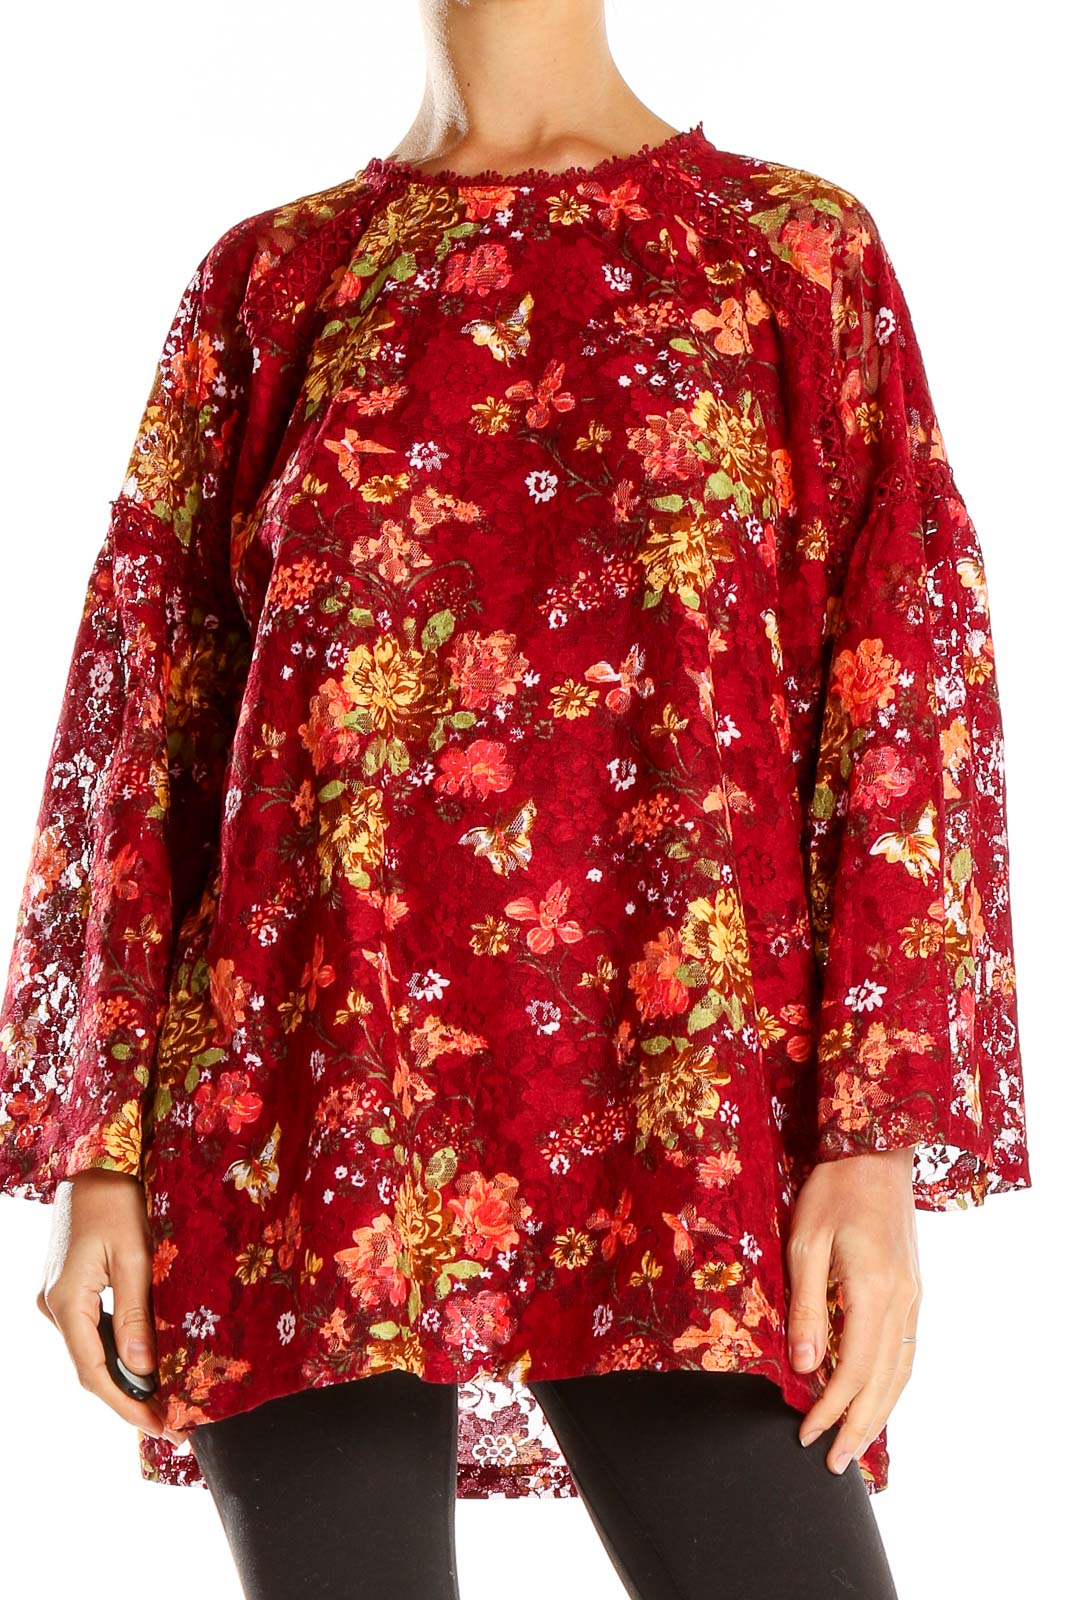 Red Floral Print Textured Bohemian Top Front